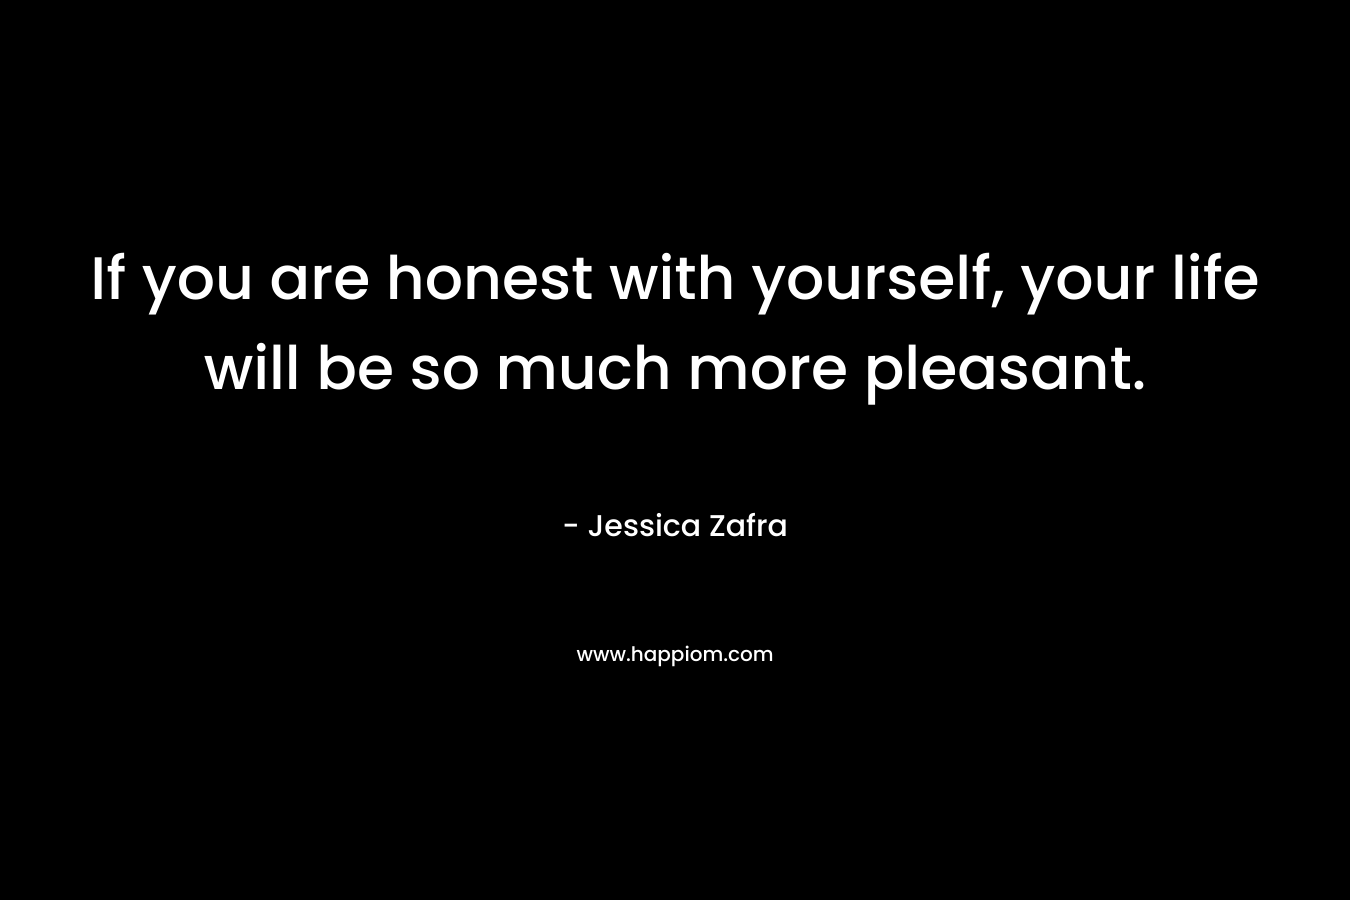 If you are honest with yourself, your life will be so much more pleasant. – Jessica Zafra